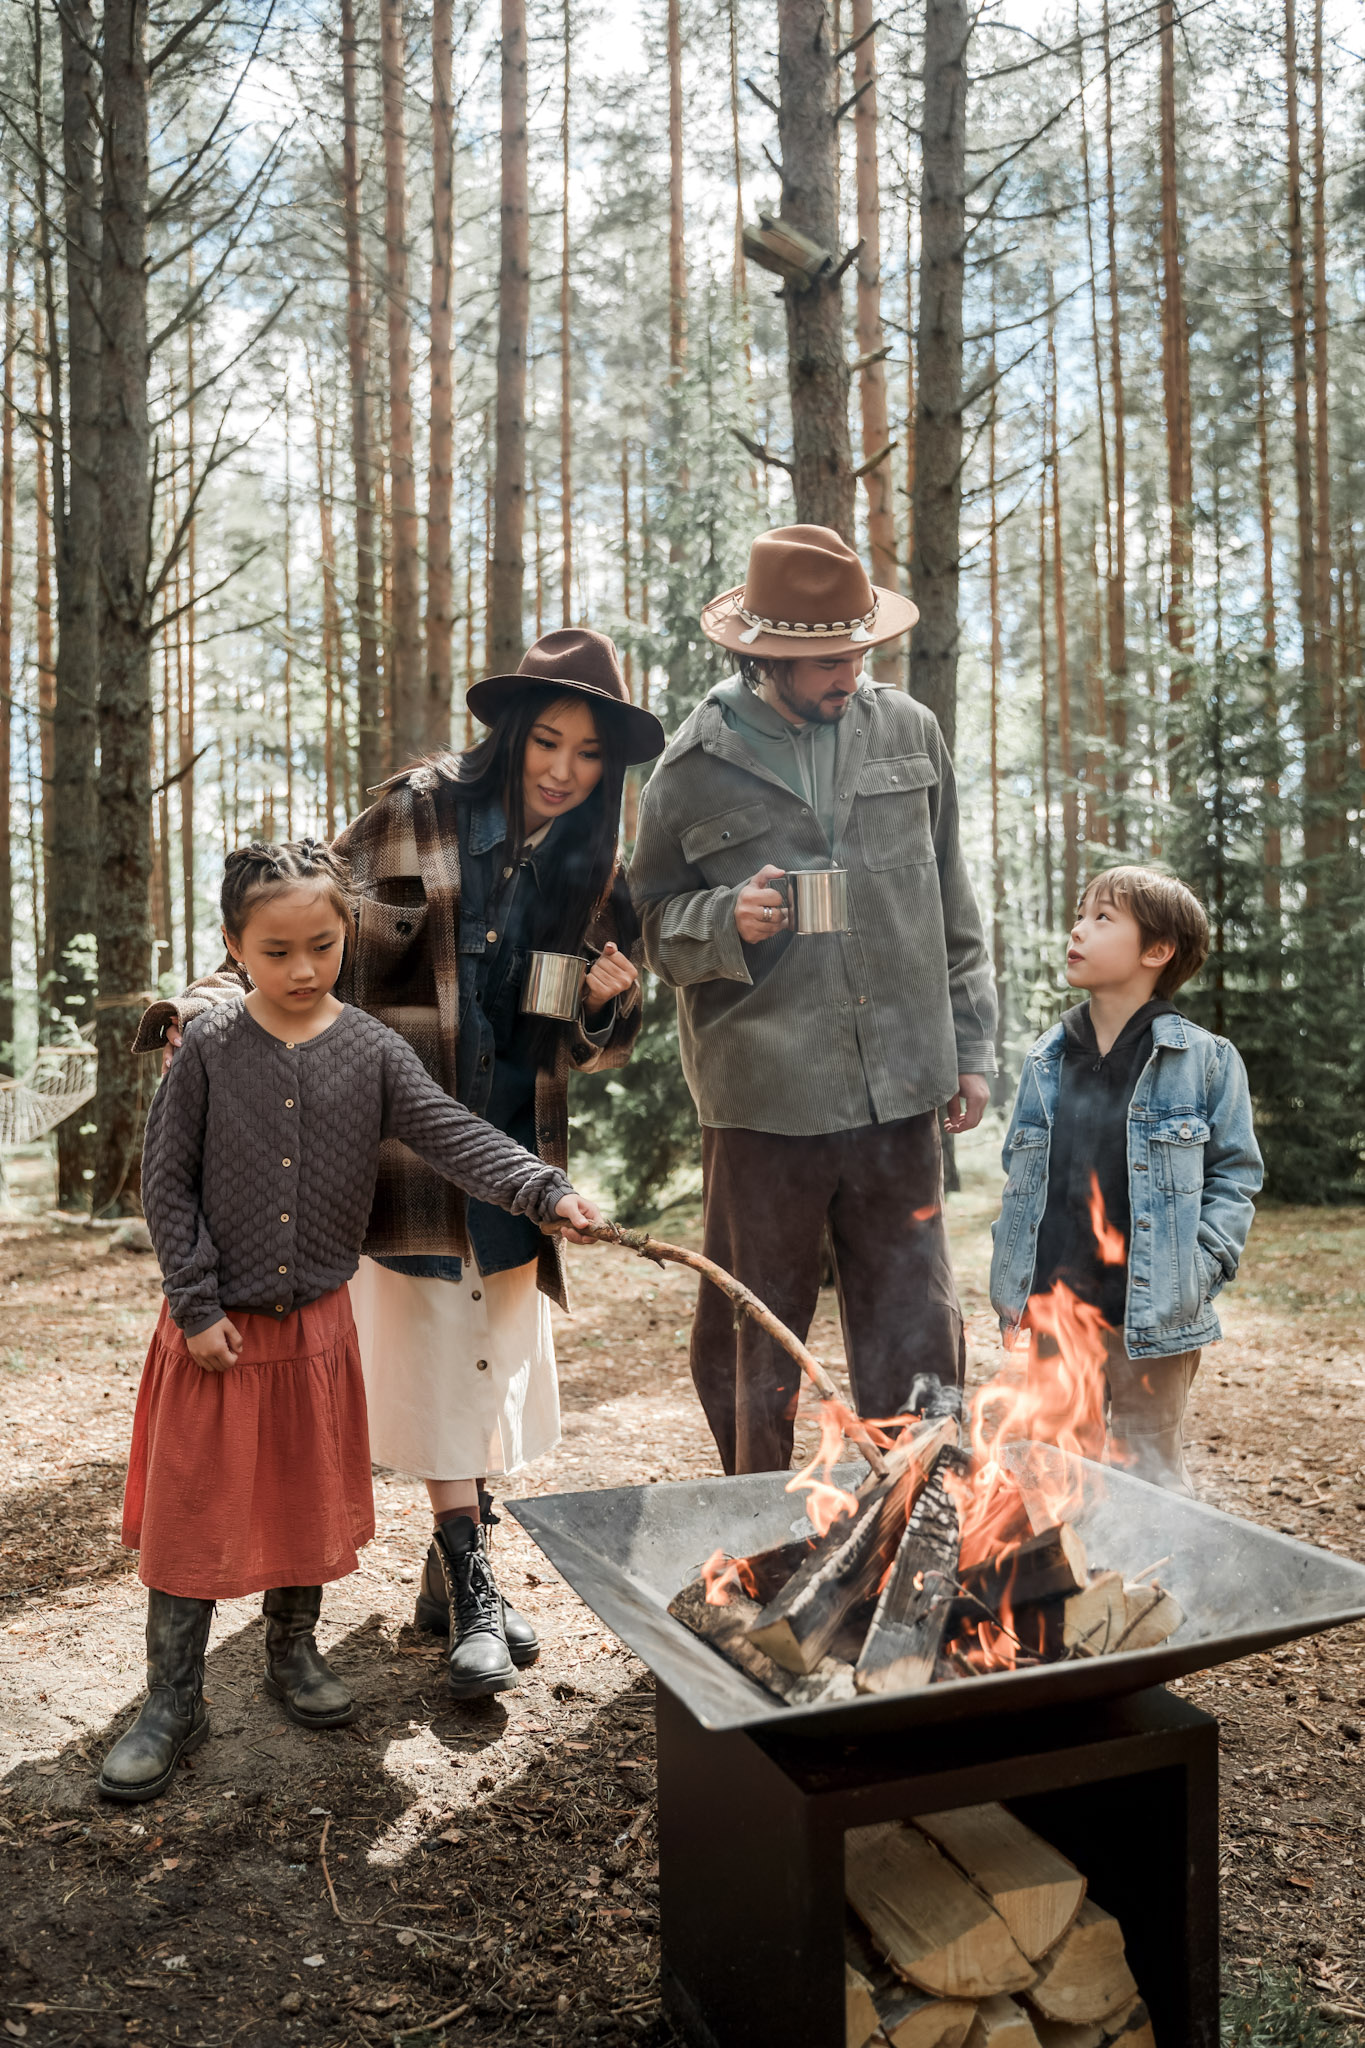 A family is enjoying a camping trip. This article provides 11 fun activities to enjoy your next fall family trip to its fullest.